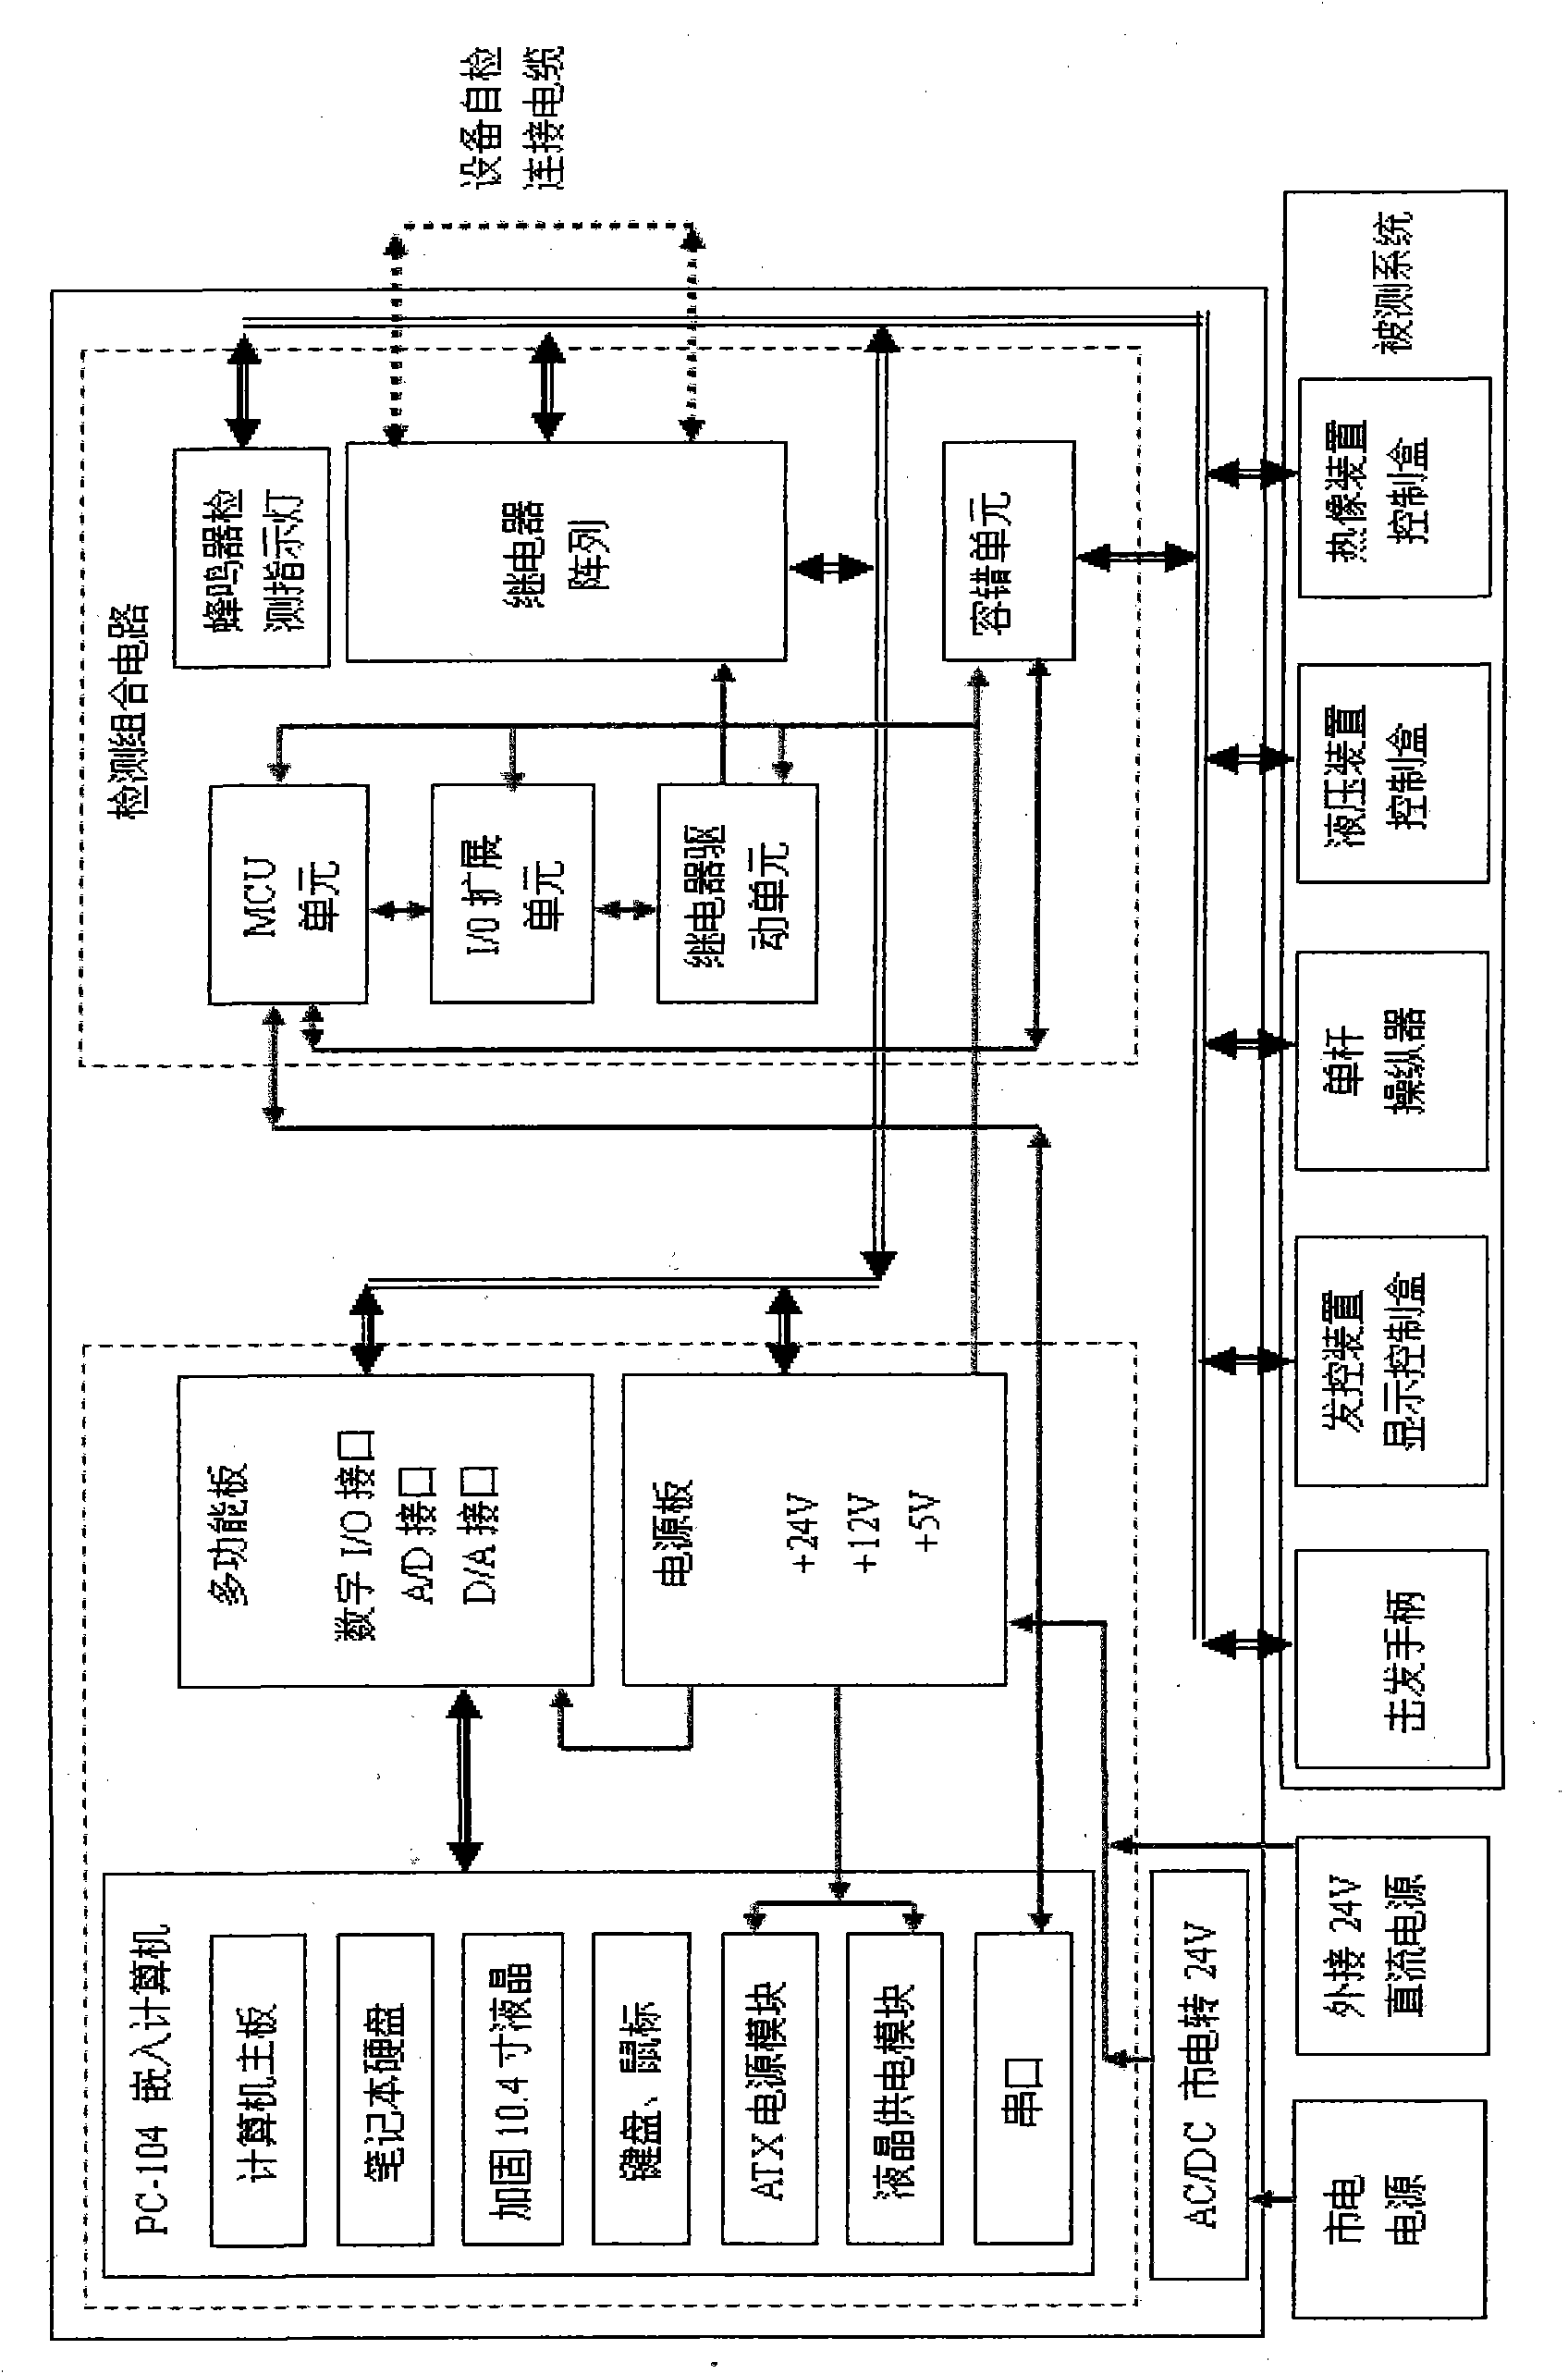 Console device detector and console device detection method